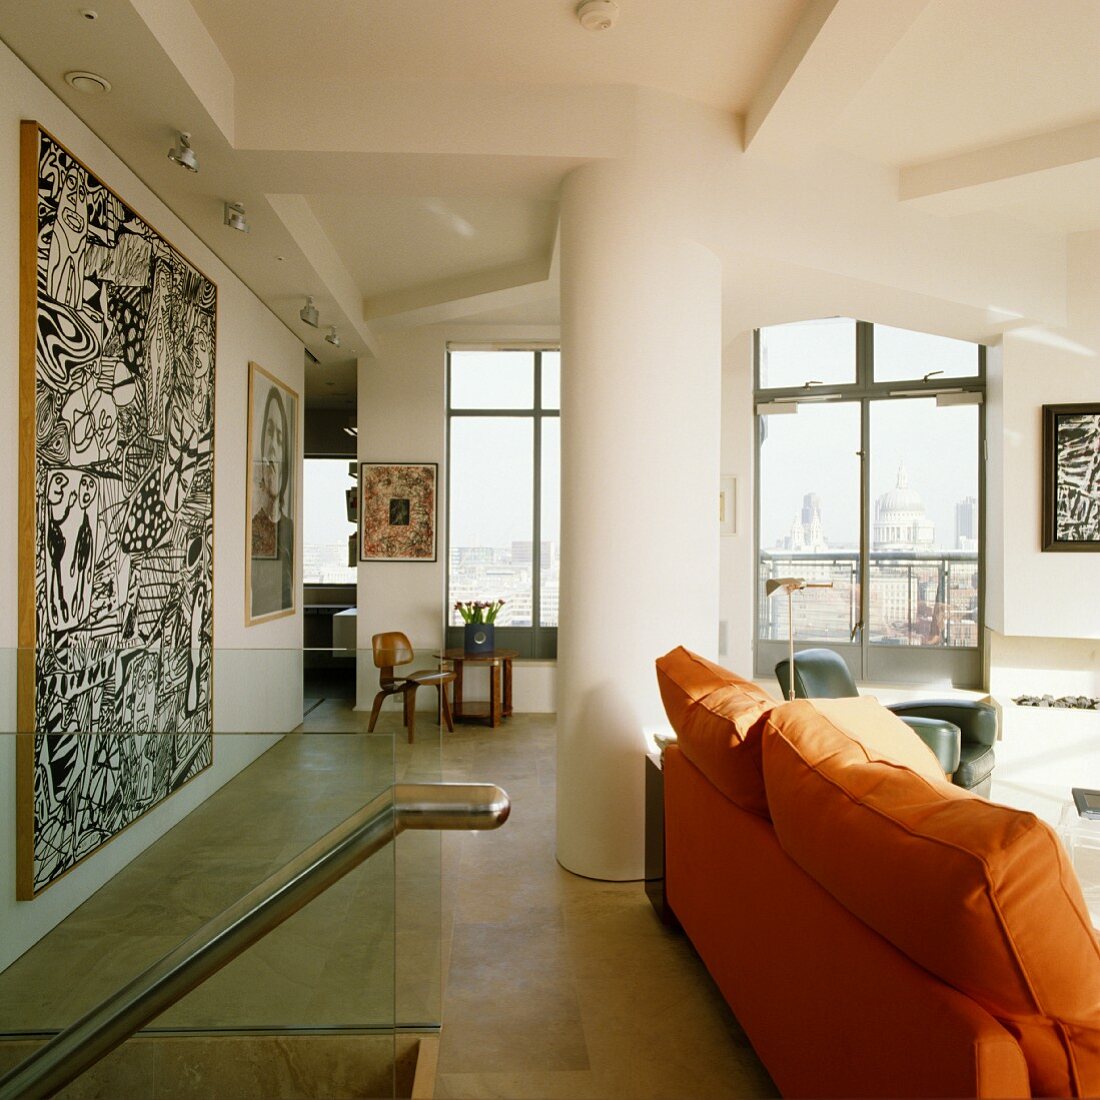 Sofa with orange upholstery in front of modern artwork on wall in living room of penthouse apartment with floor-to-ceiling windows